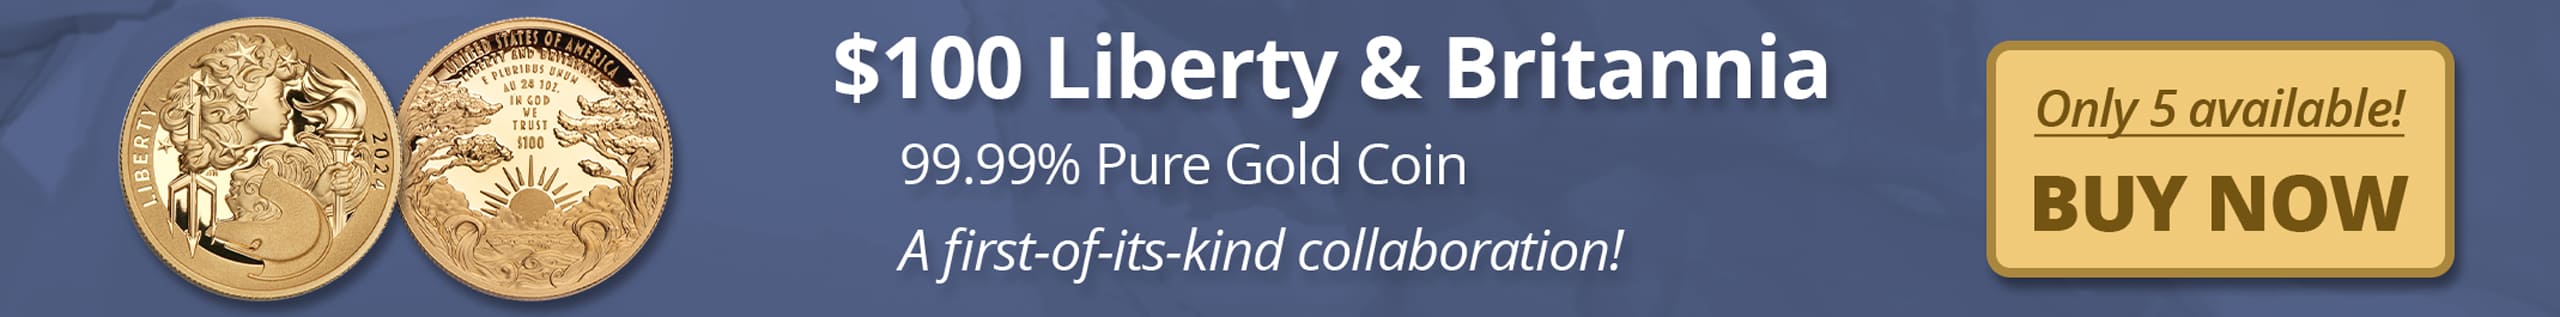 $100 Liberty and Britannia - Buy Now